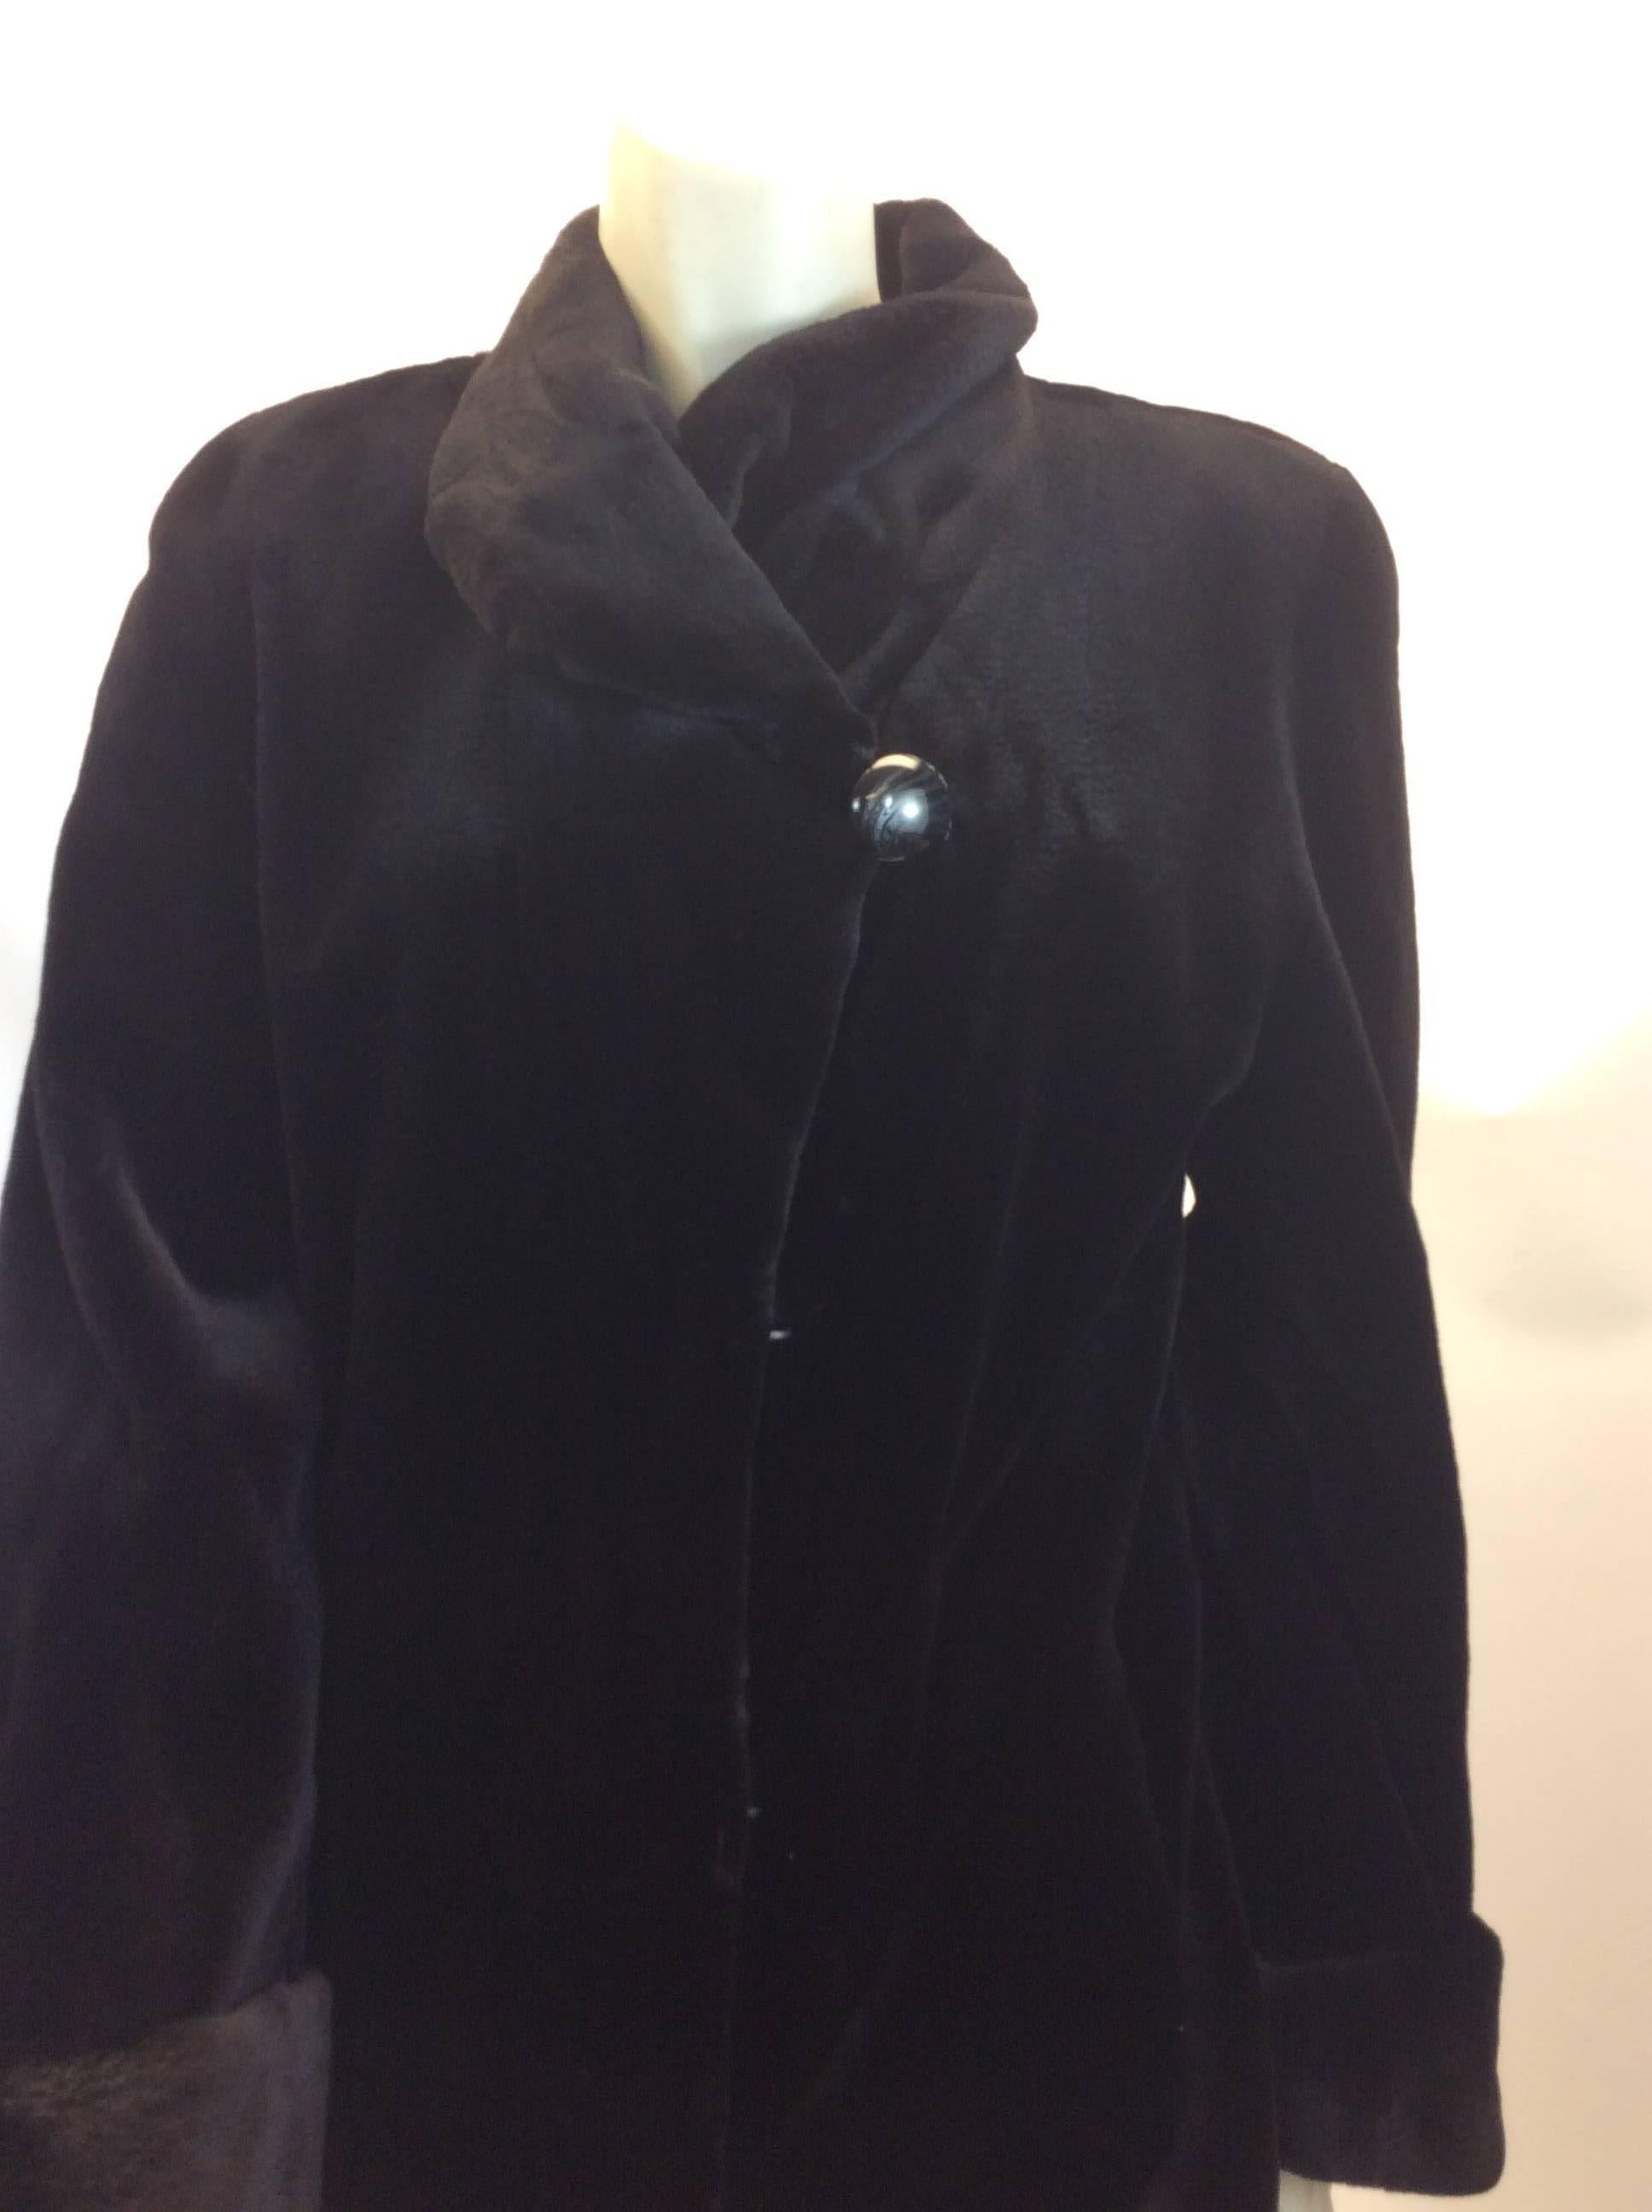 Long Black Sheared Mink Coat
One button closure at the top
$3500
